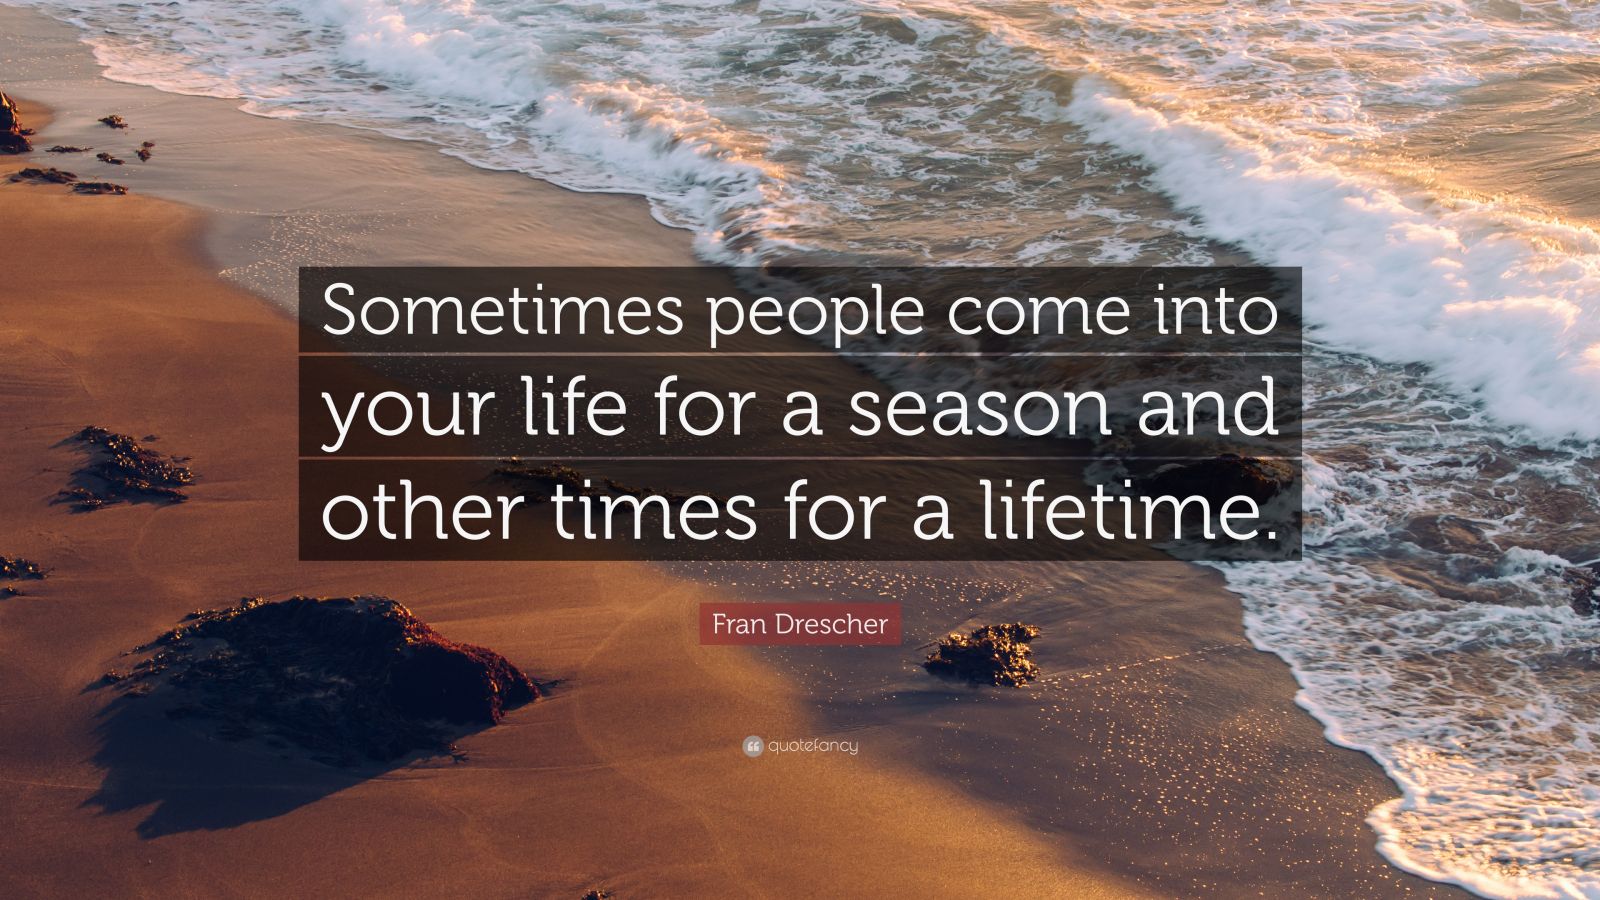 Fran Drescher Quote: “Sometimes people come into your life for a season ...